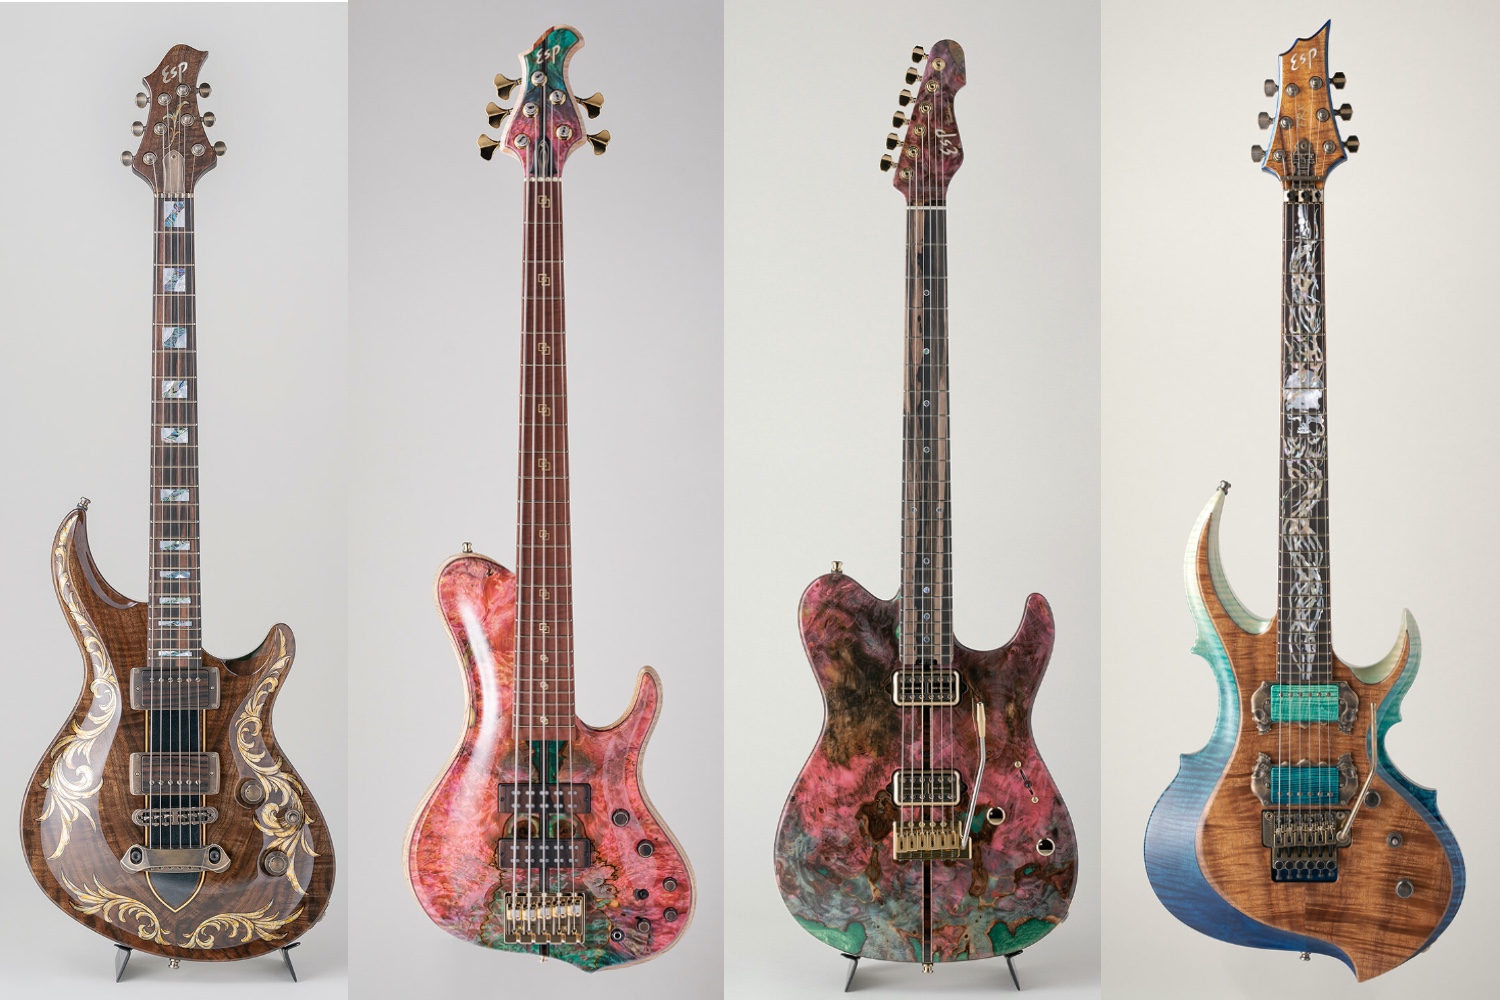 ESP's 2021 Exhibition Limited Custom Shop collection has landed